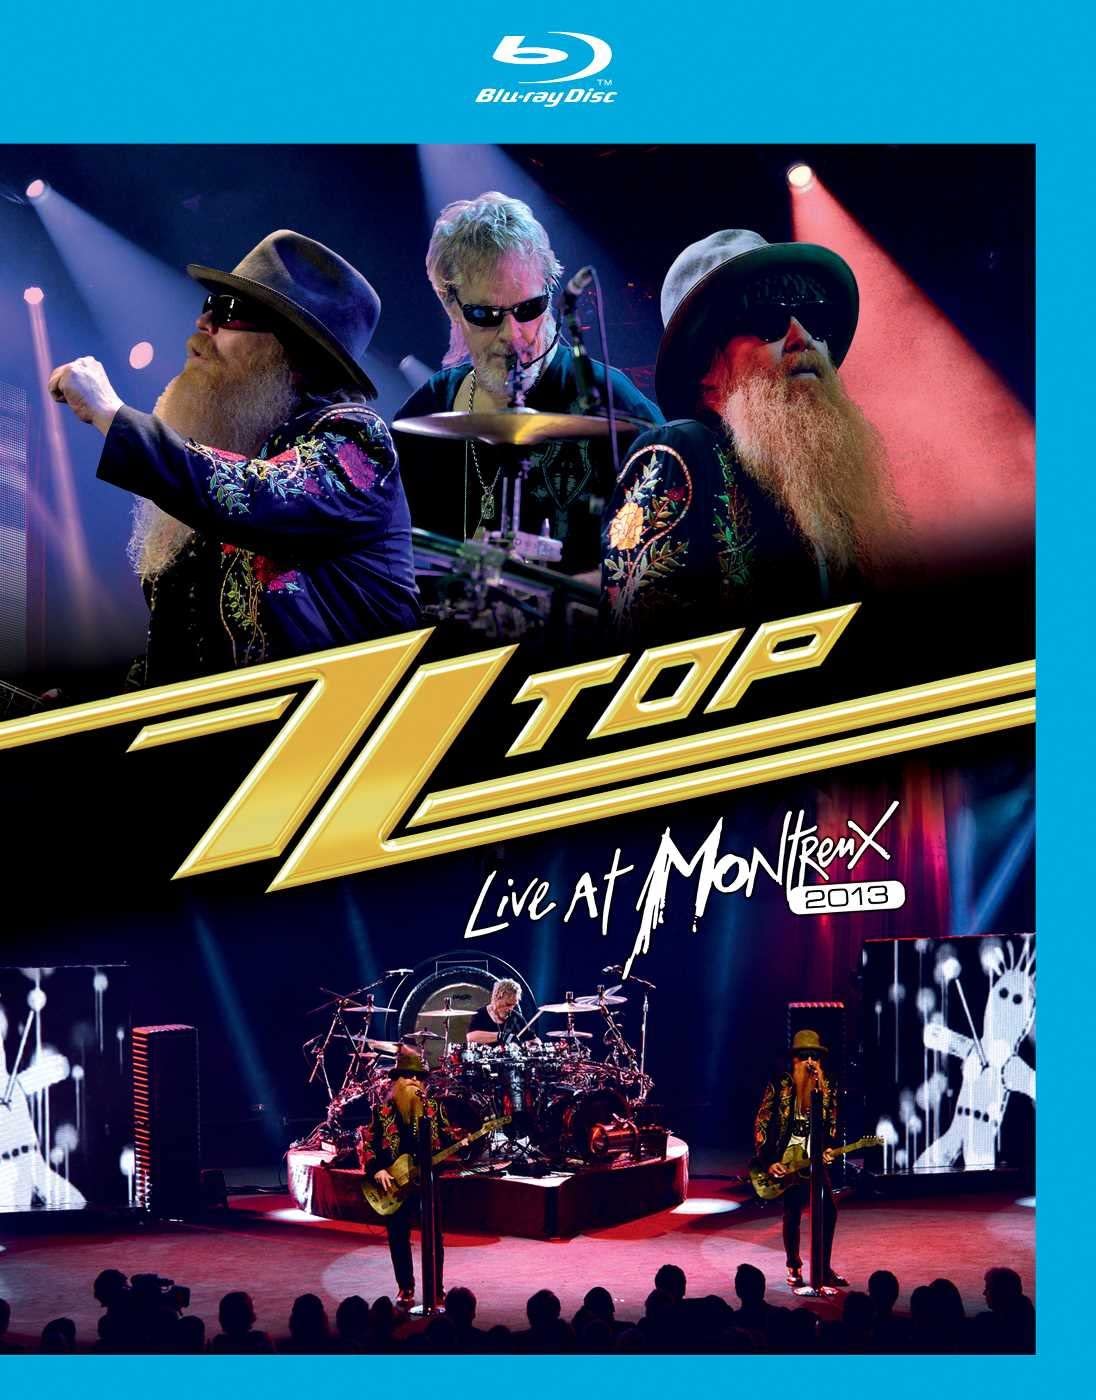 ZZ Top - Live At Montreux 2013 [Blu-ray] [2014] (Blu-ray)